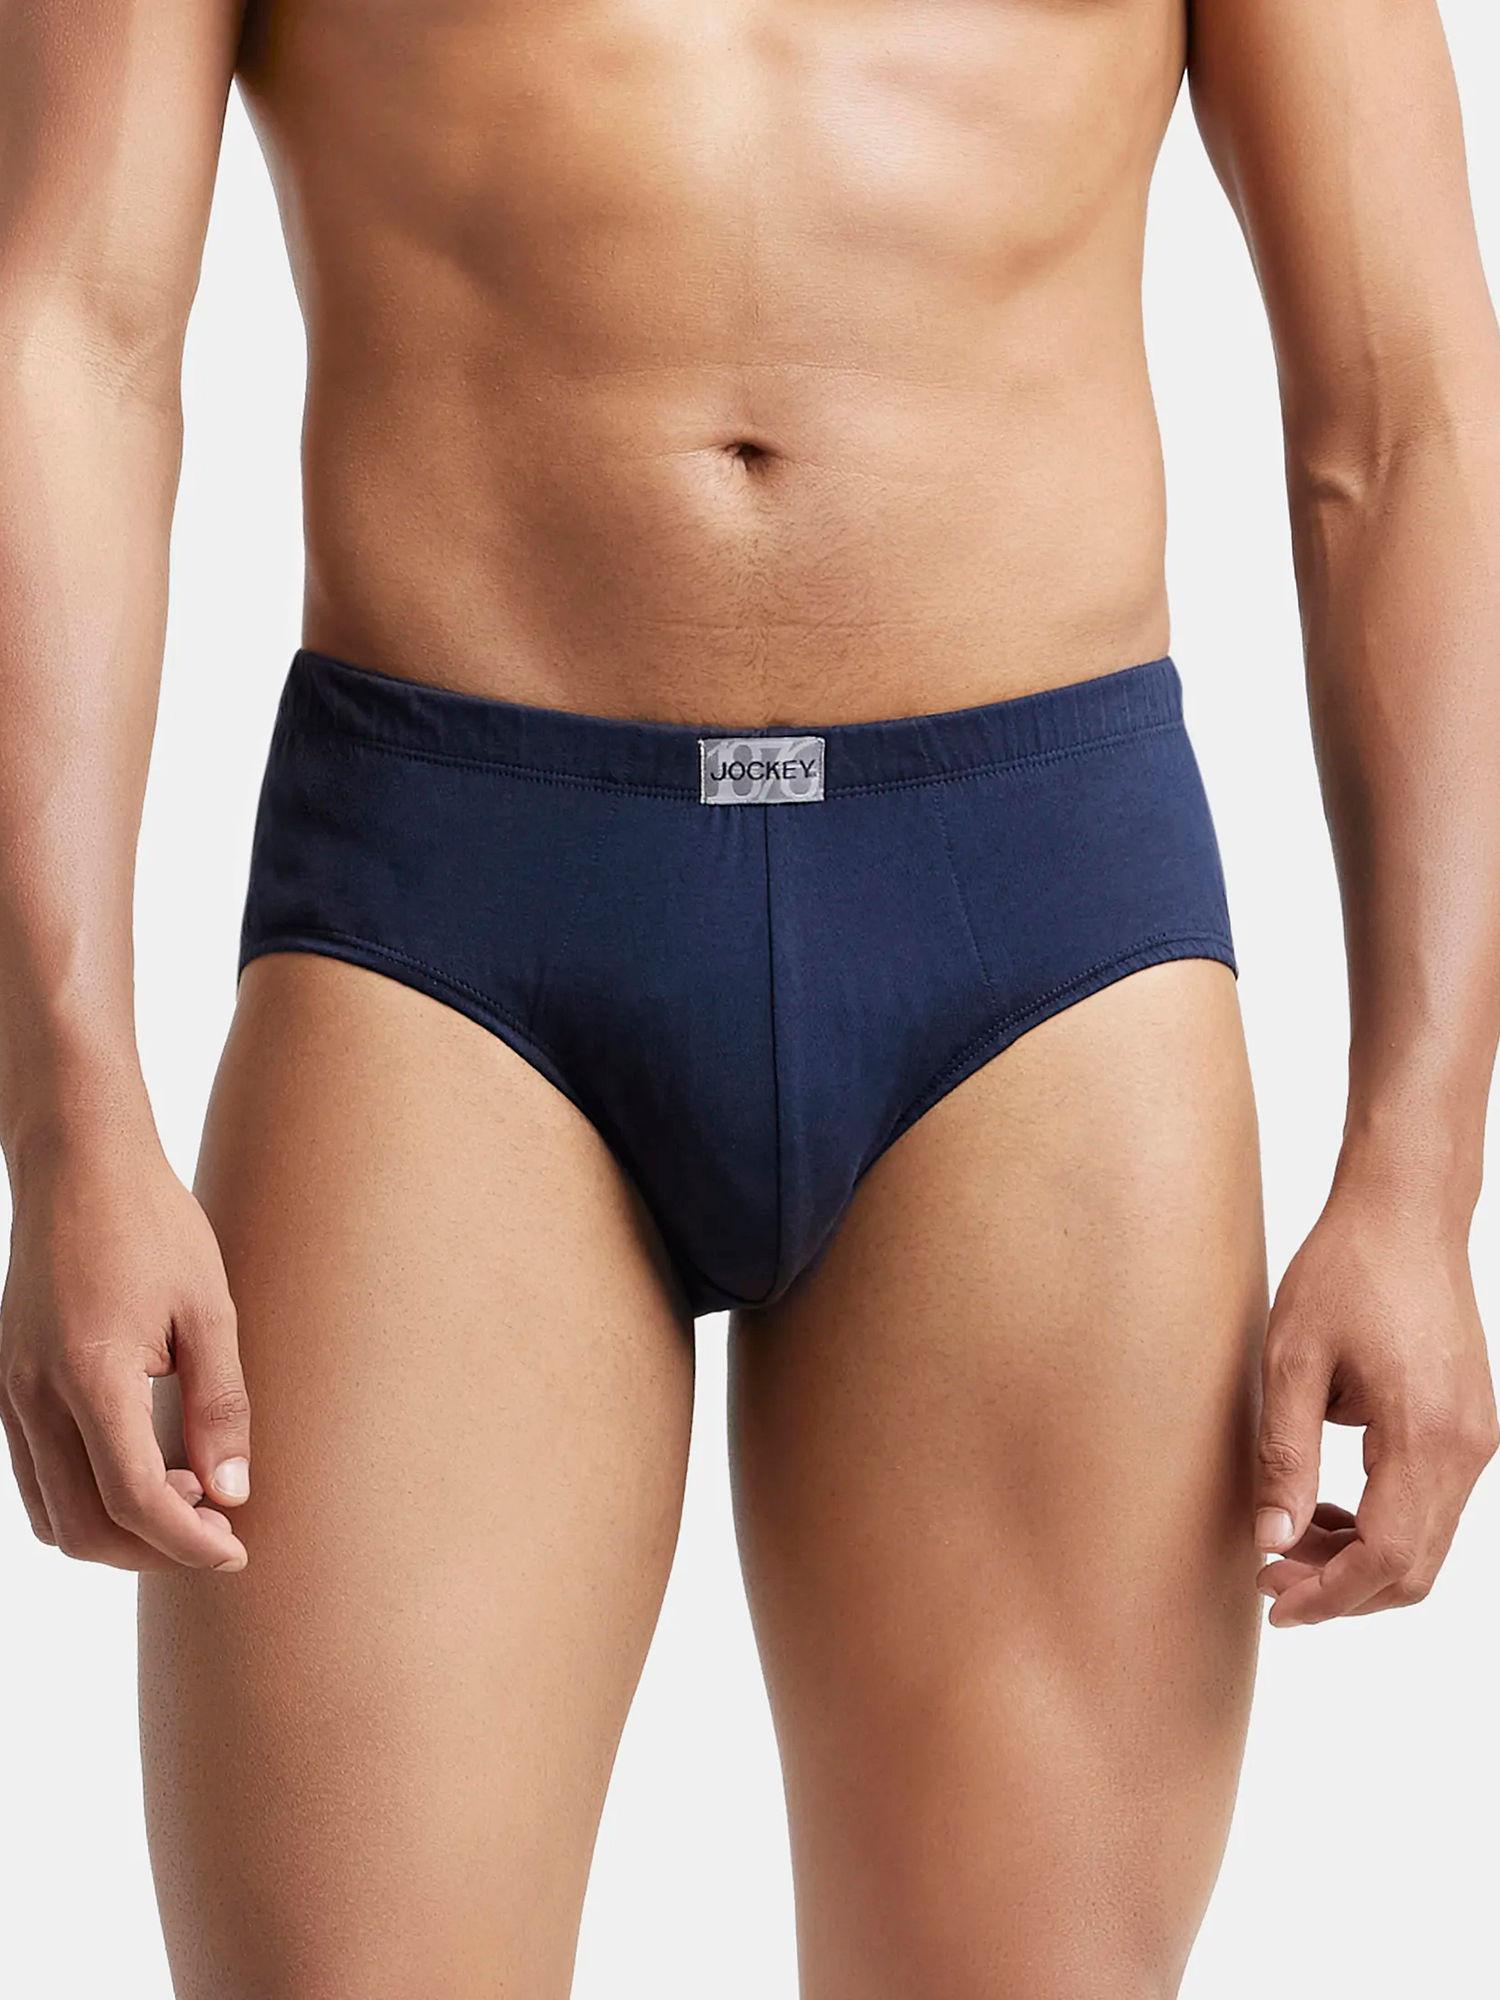 8035 Mens Super Cotton Solid Poco Brief with Ultrasoft Concealed Waistband-Blue